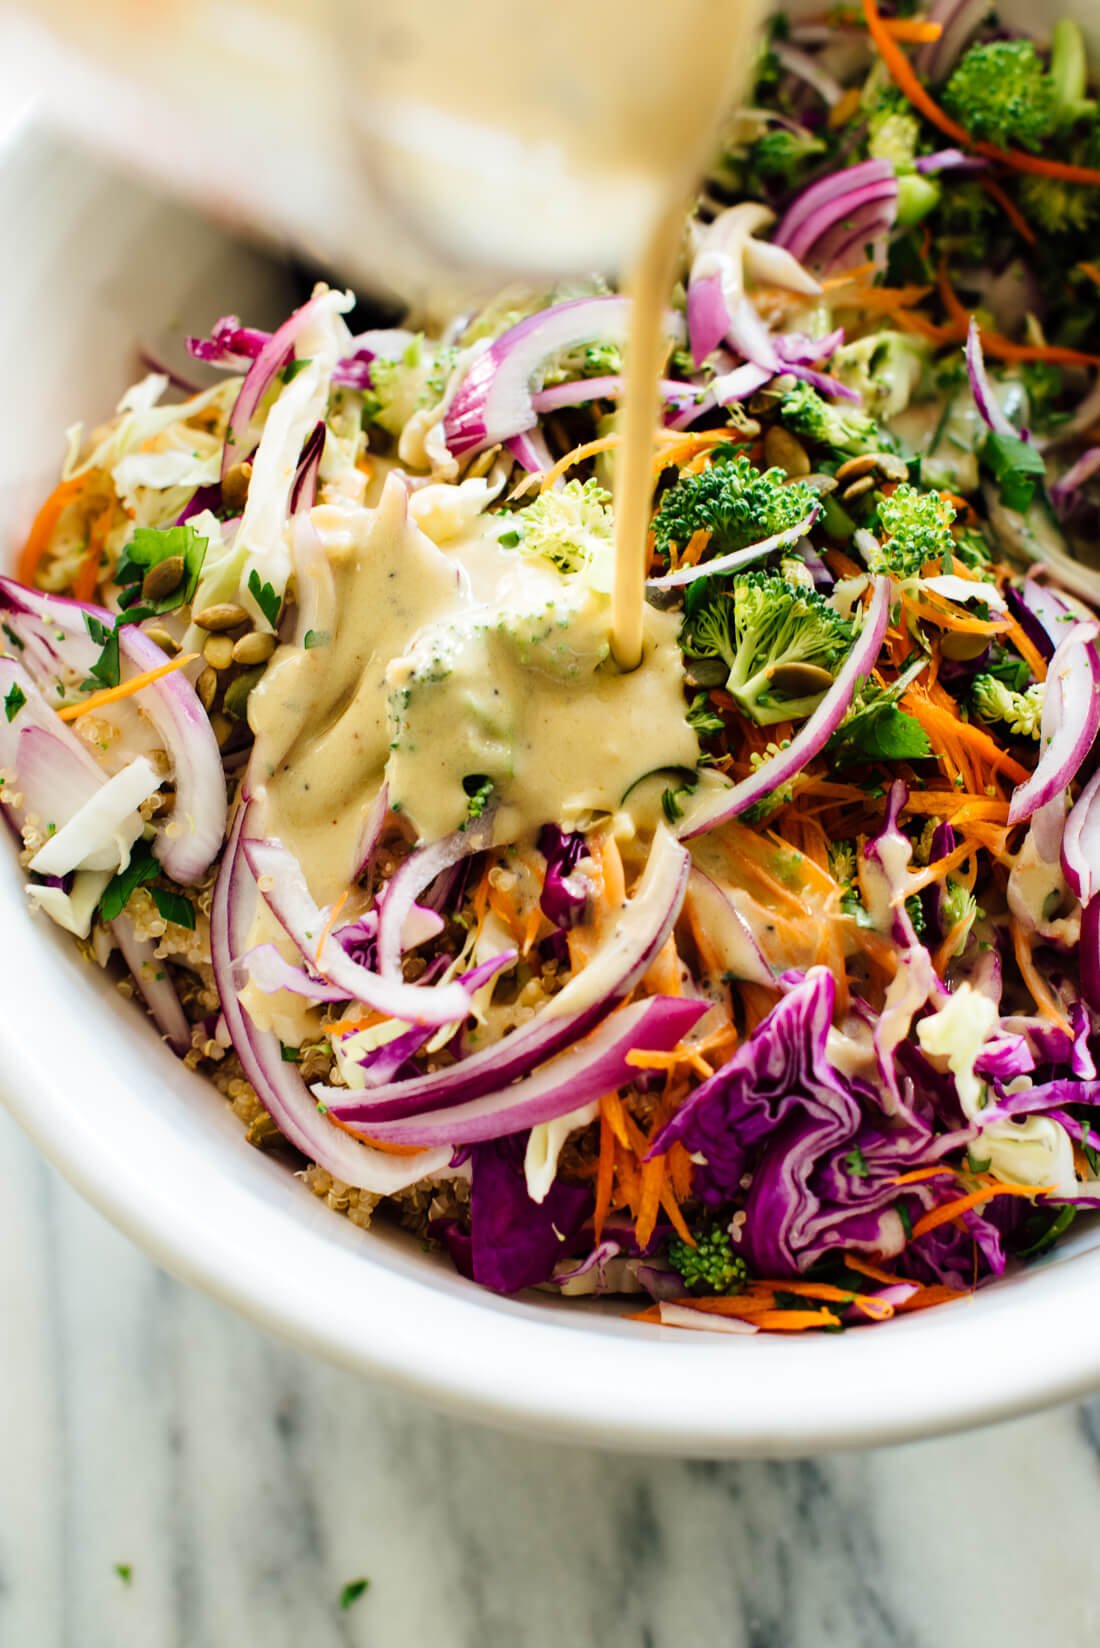 How to make quinoa slaw with honey-mustard dressing